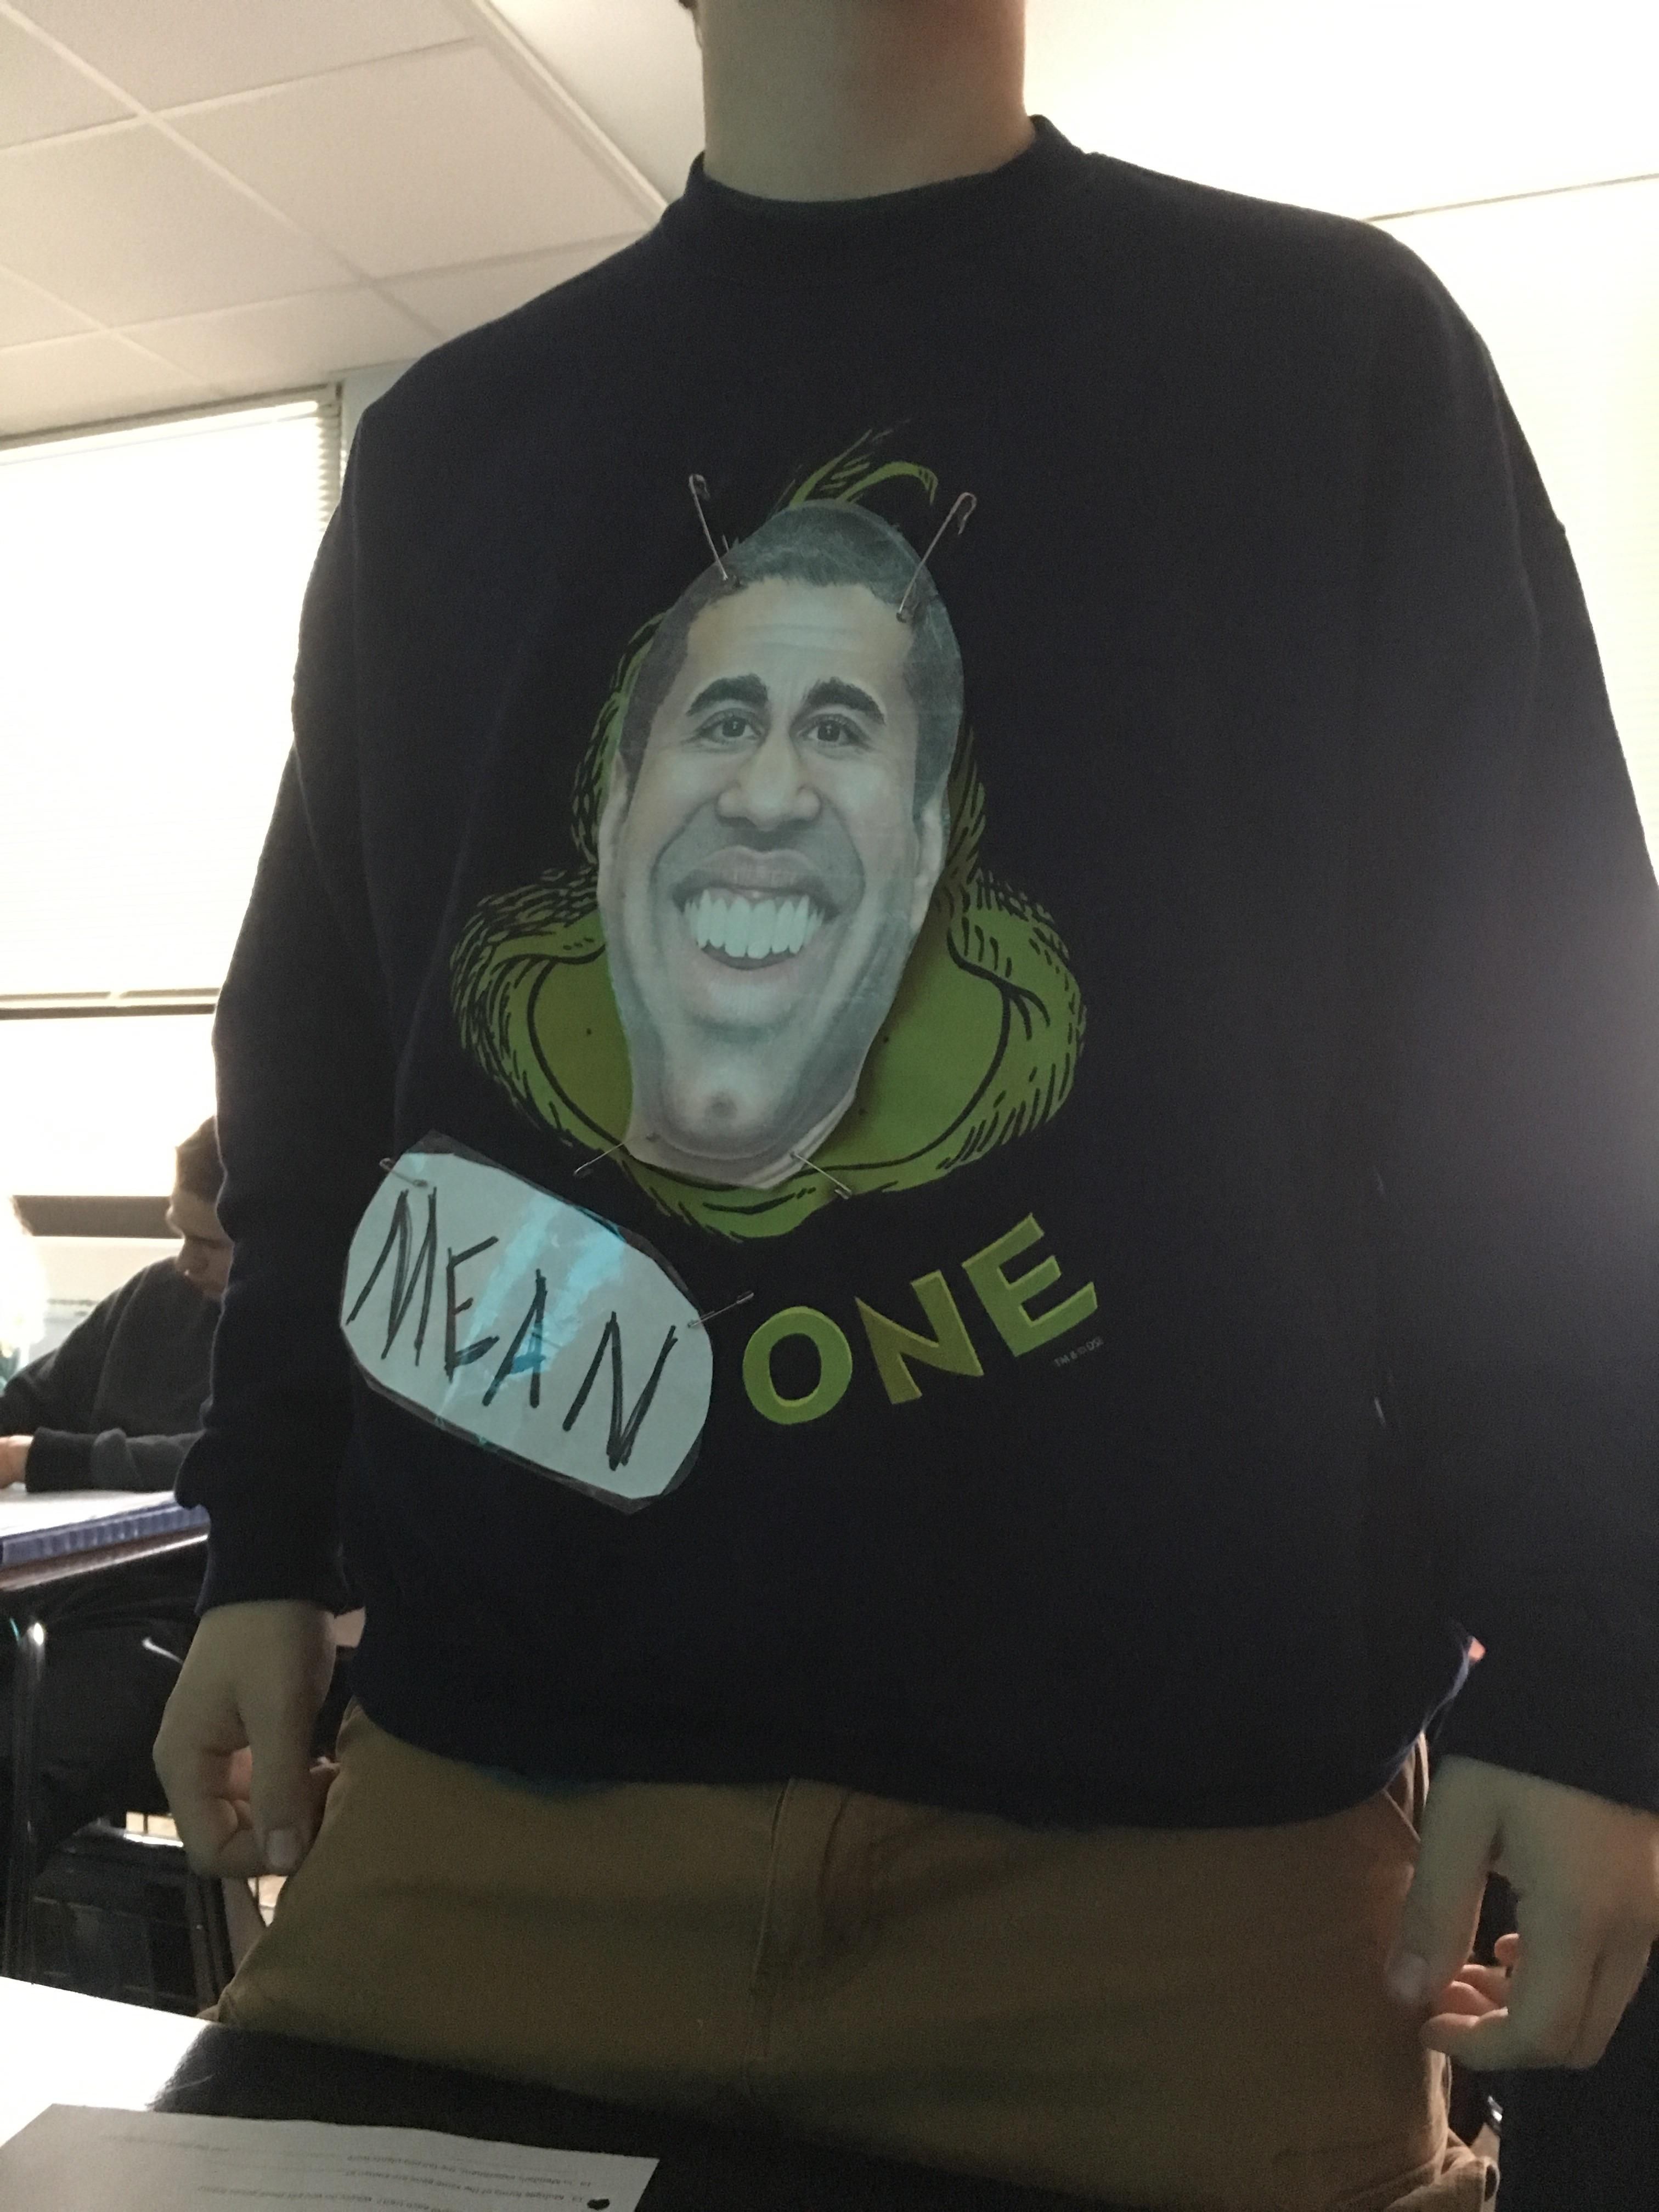 Today is ugly sweater day at school, this kid won